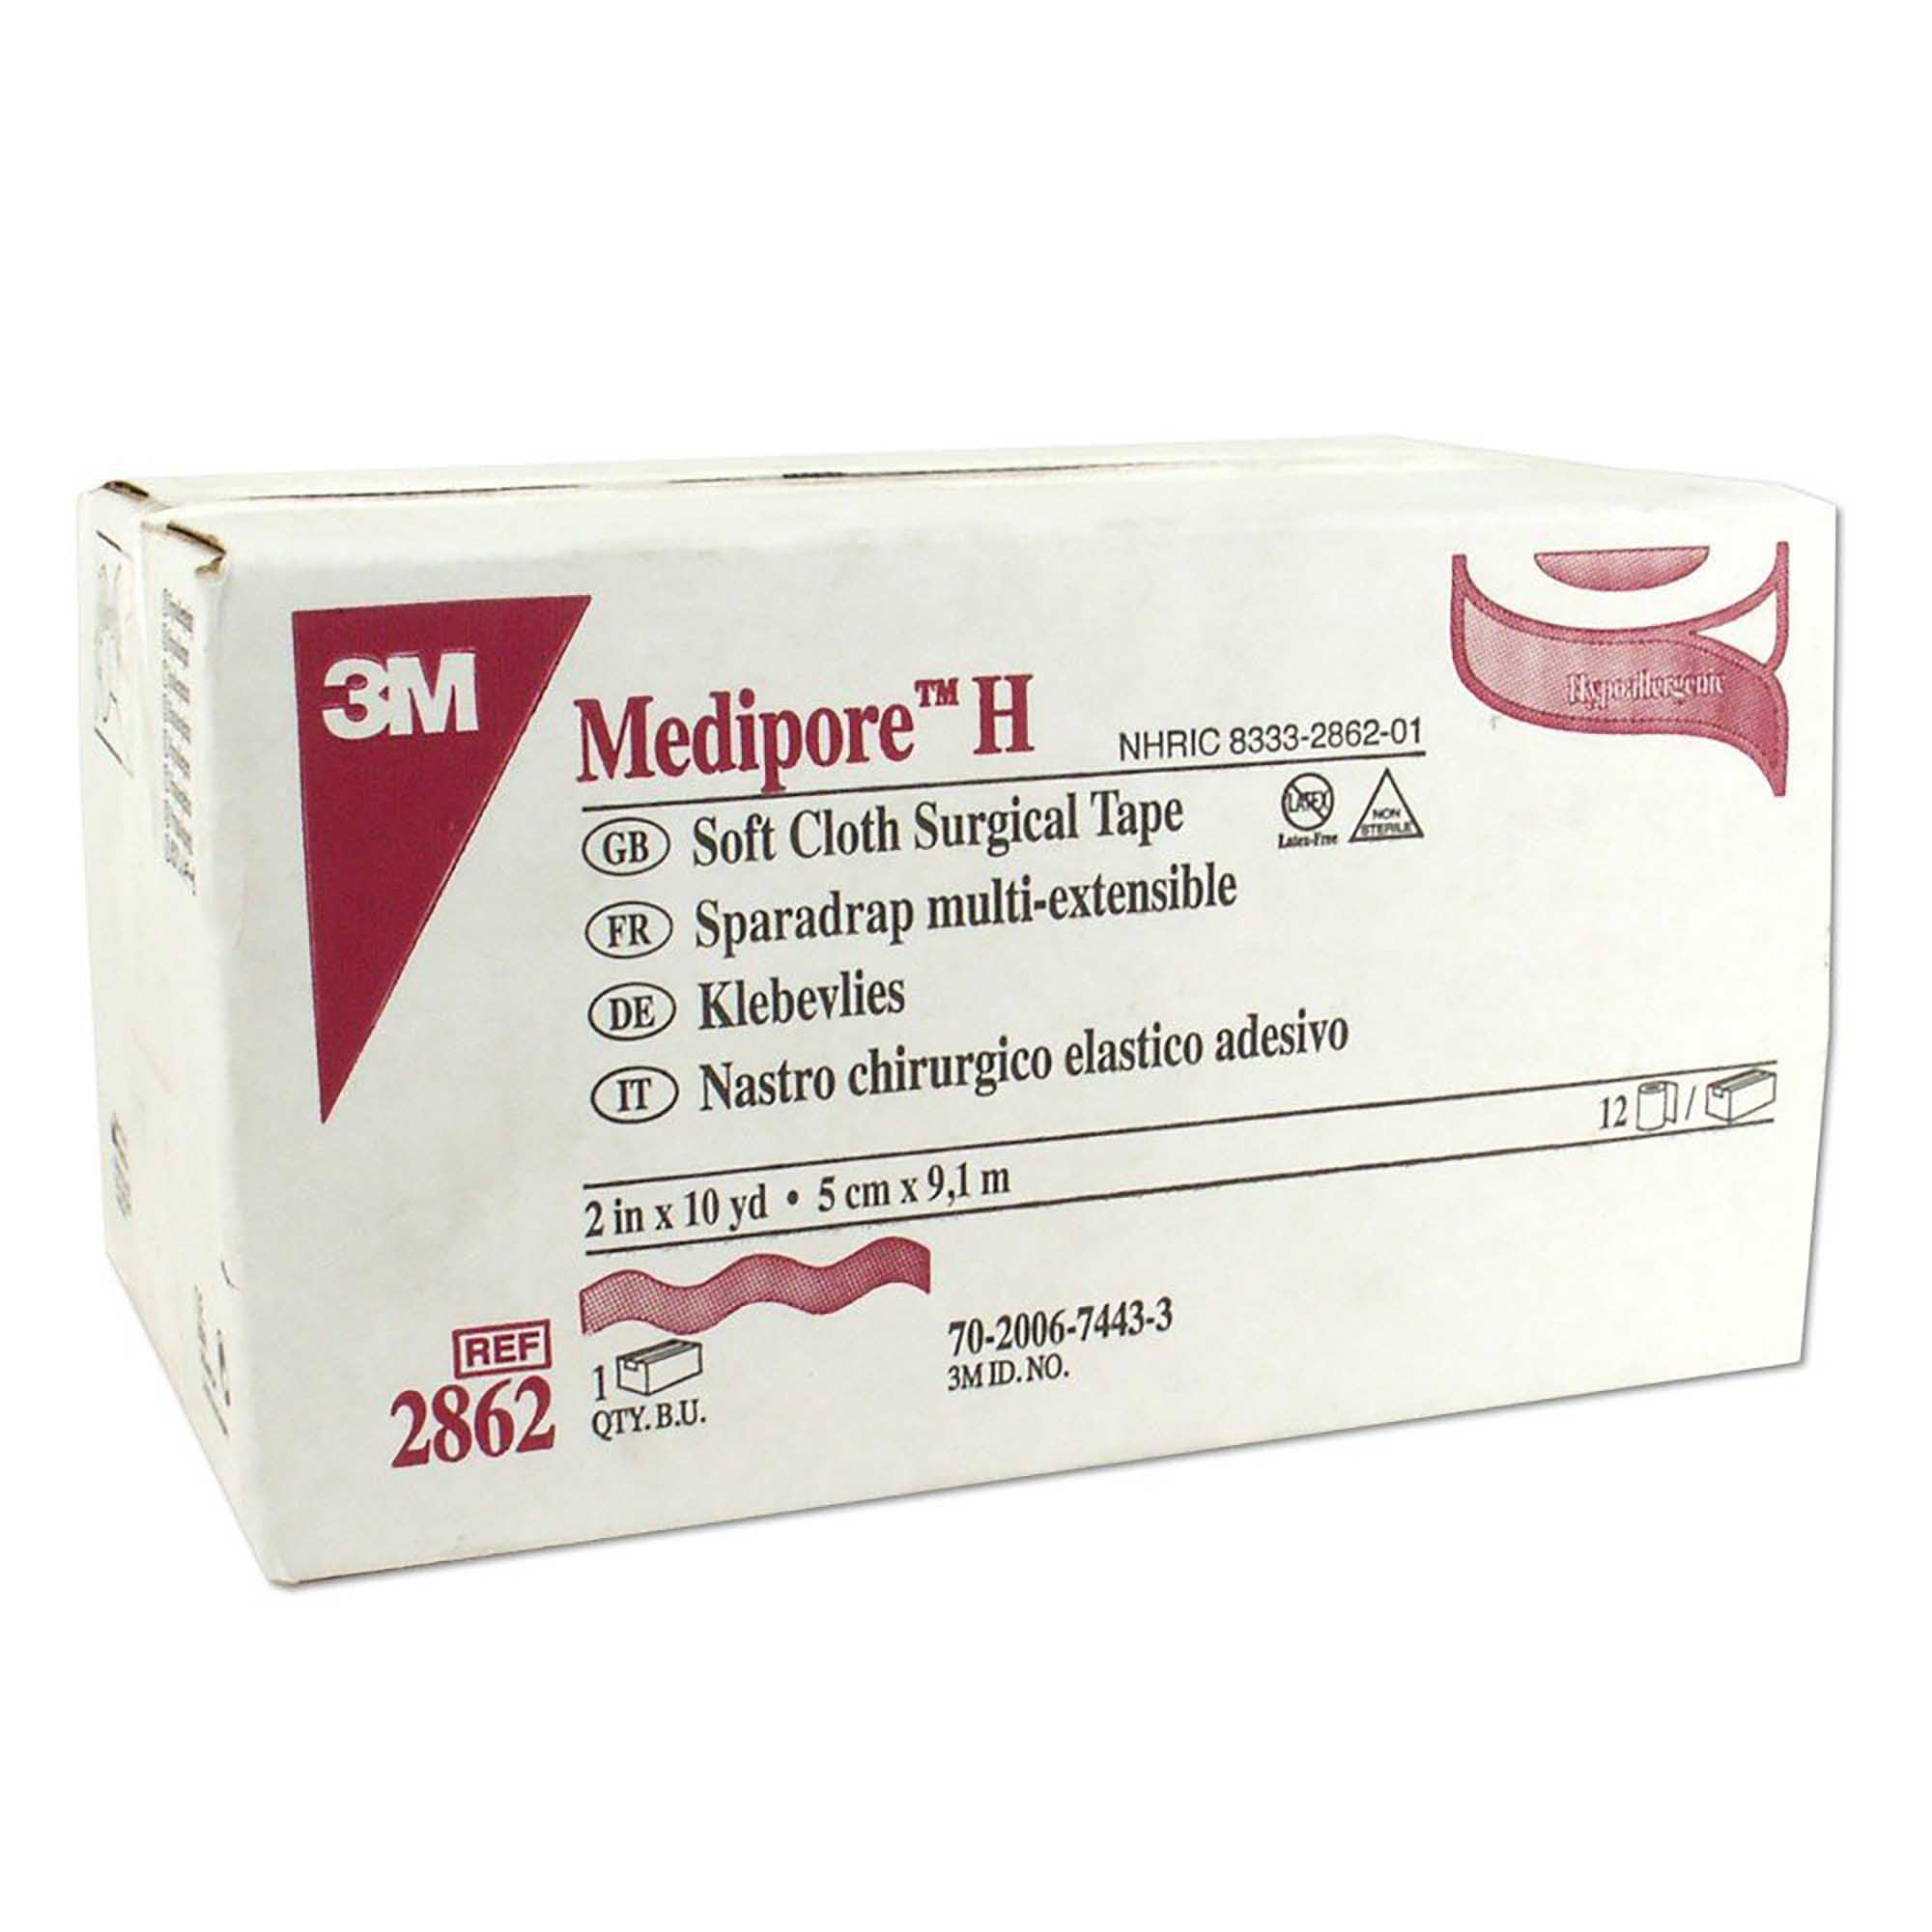 3M Medipore Soft Cloth Surgical Tape - 2 x 10 yds - MMM2962_EA :  : Health & Personal Care